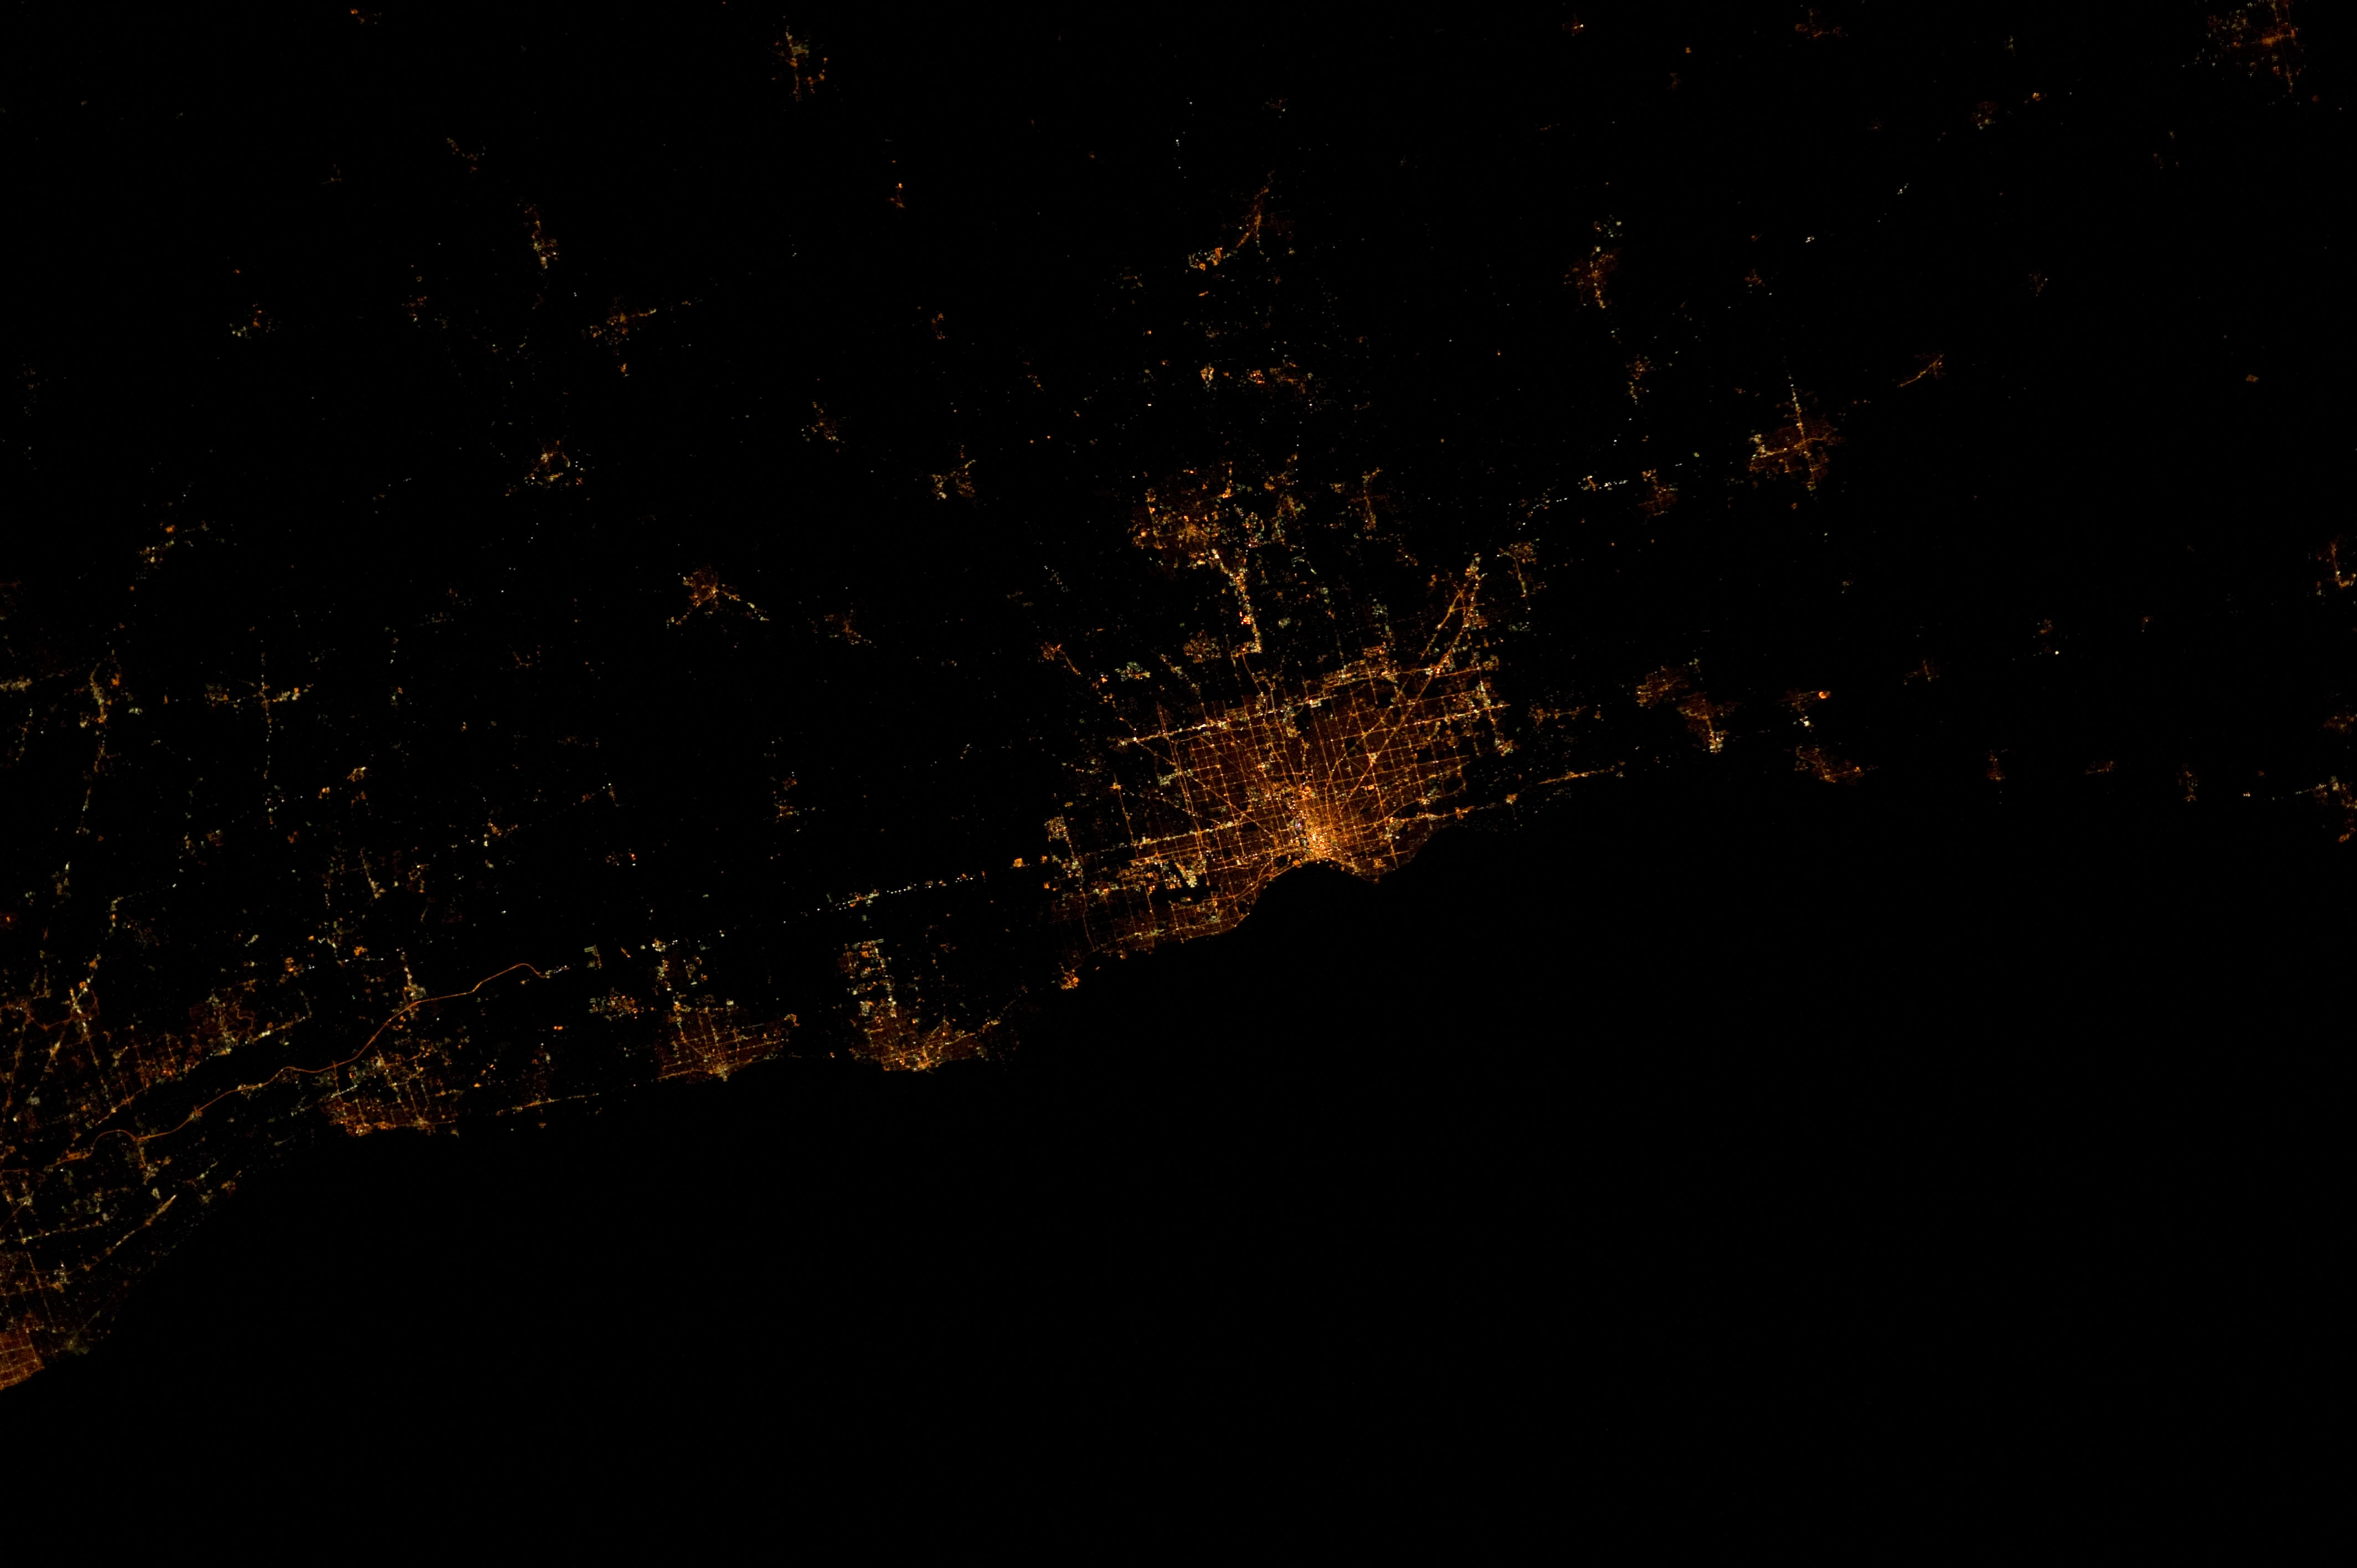 Waukegan, 11:23:40 pm CDT in 2012 during Expedition 30 at the International Space Station